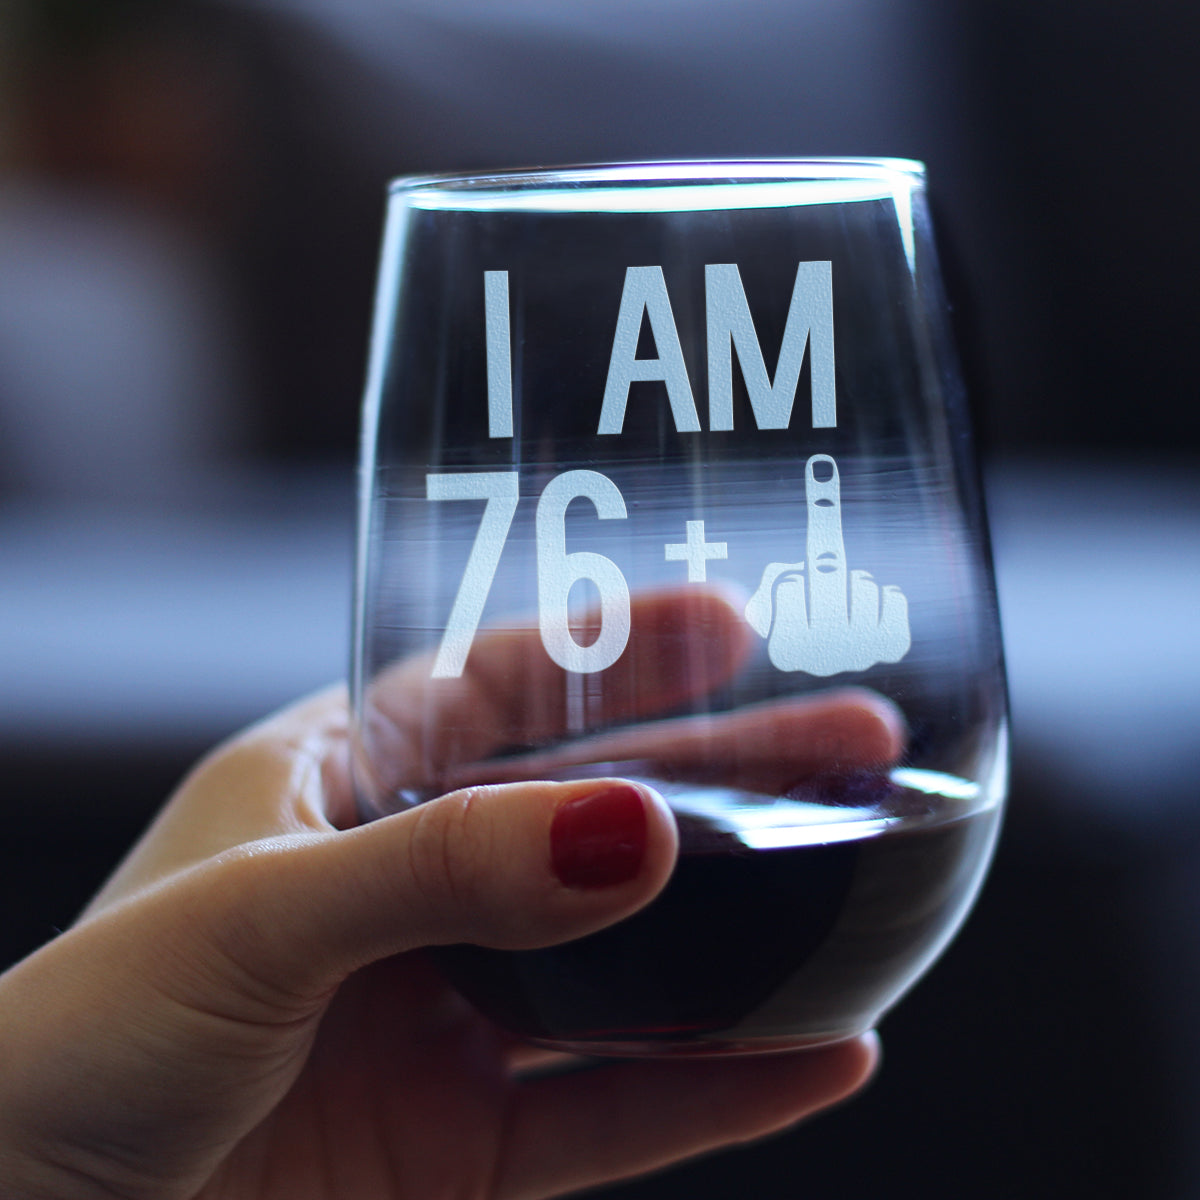 76 + 1 Middle Finger - 77th Birthday Stemless Wine Glass for Women &amp; Men - Cute Funny Wine Gift Idea - Unique Personalized Bday Glasses for Mom, Dad, Friend Turning 77 - Drinking Party Decoration